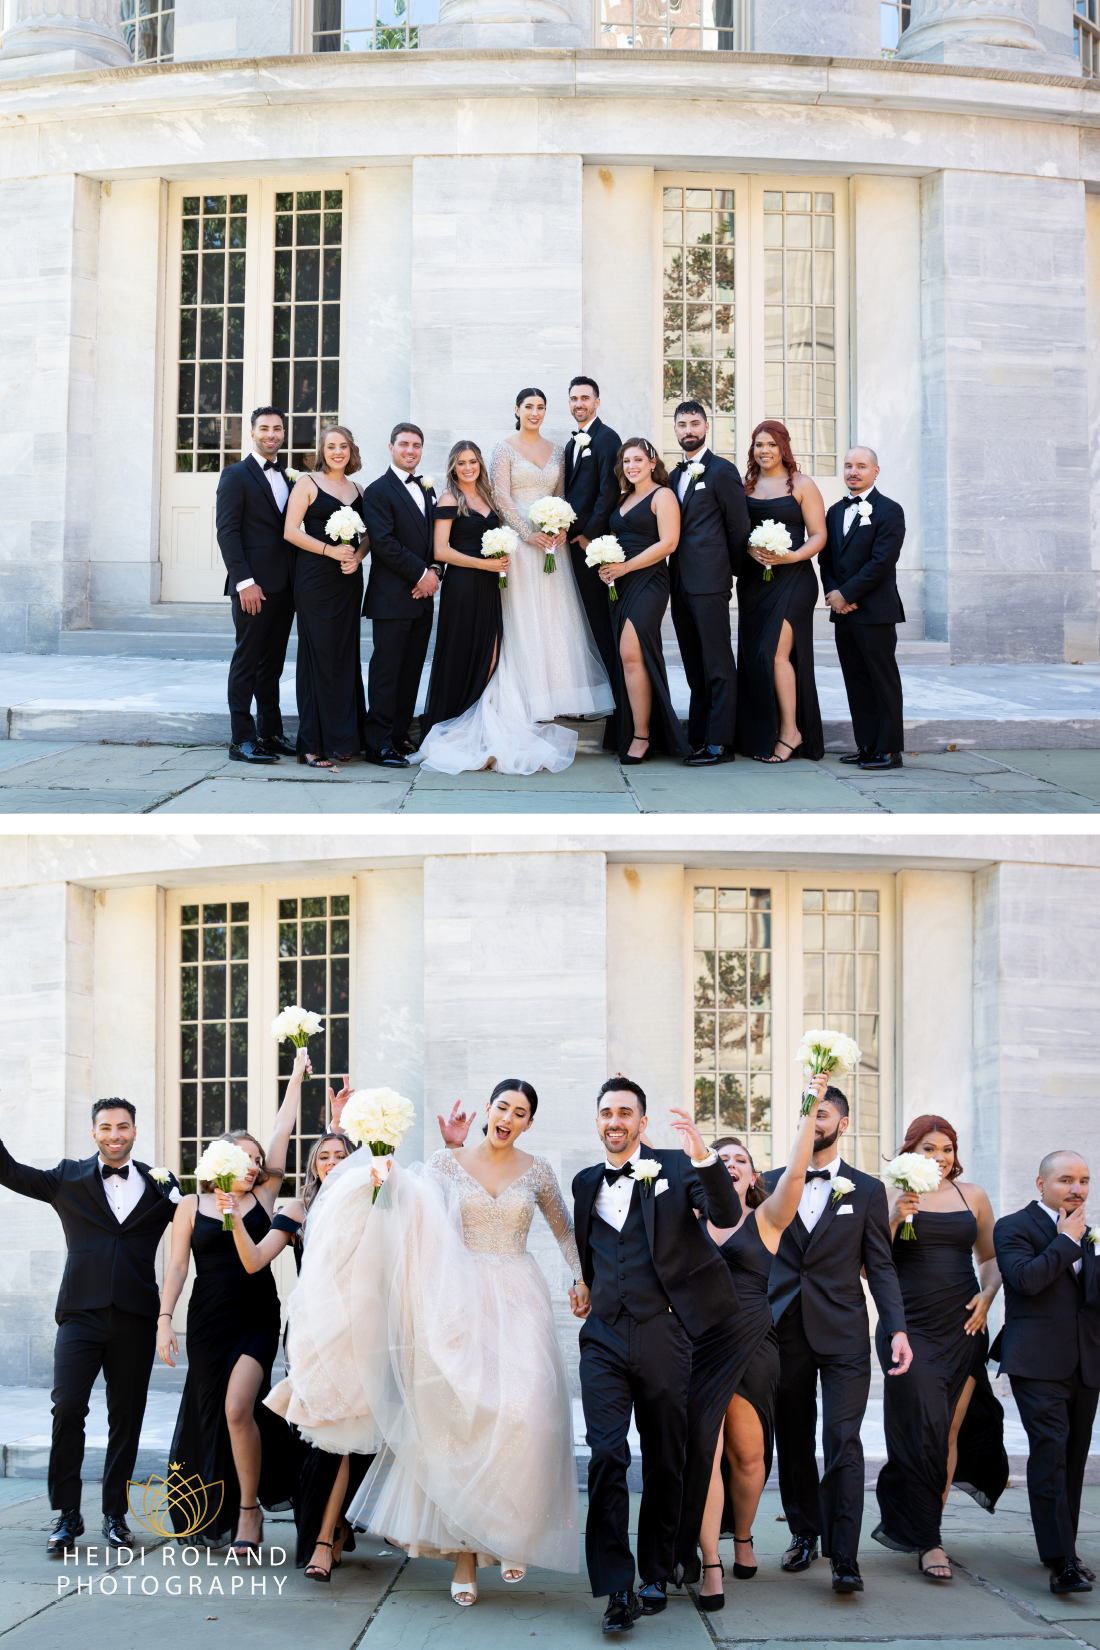 Bride and groom with their wedding party outside the merchant exchange building in Old City Philadelphia